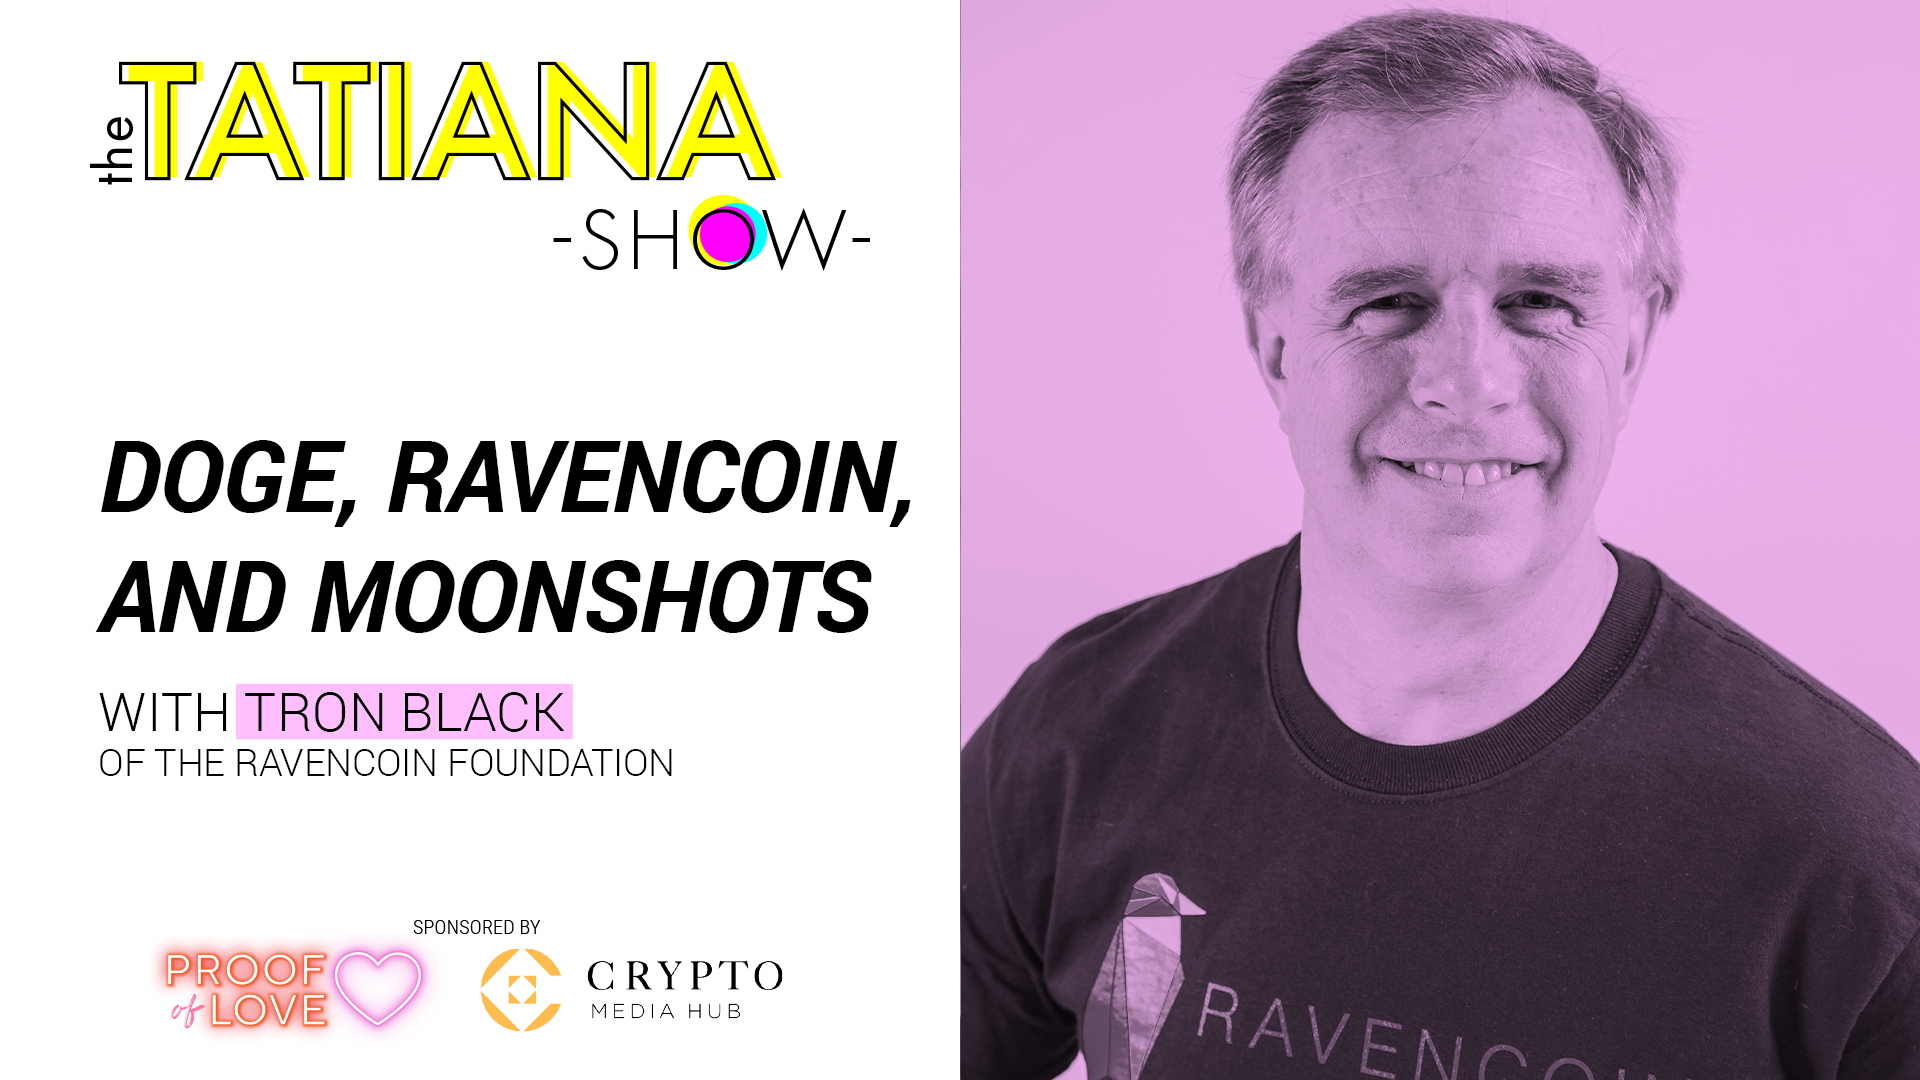 Doge Ravencoin and Moonshots with Tron Black of the Ravencoin Foundation